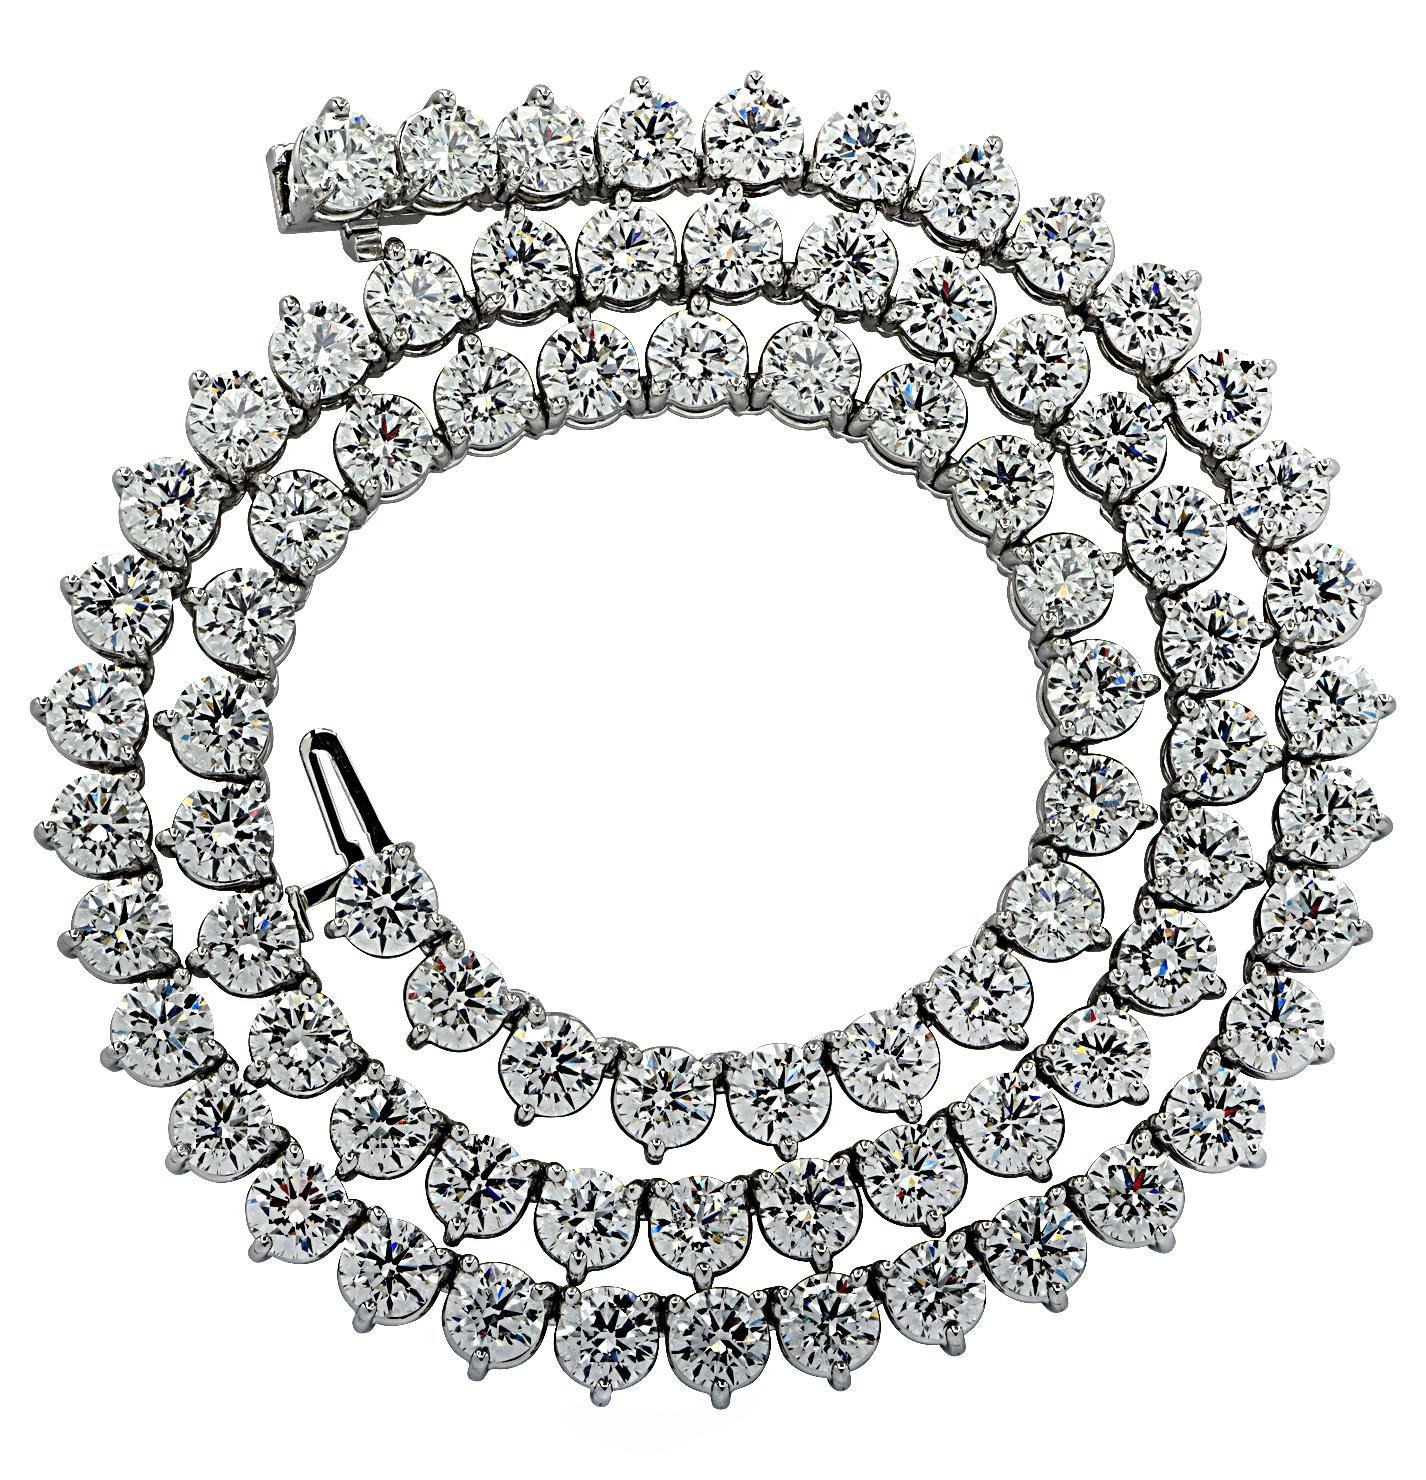 Spectacular Vivid Diamonds Straight Line diamond tennis necklace crafted in  platinum, showcasing 80 GIA certified round brilliant cut diamonds weighing 32.41 carats total, H-I color, SI Clarity. Each GIA certified diamond was carefully selected,